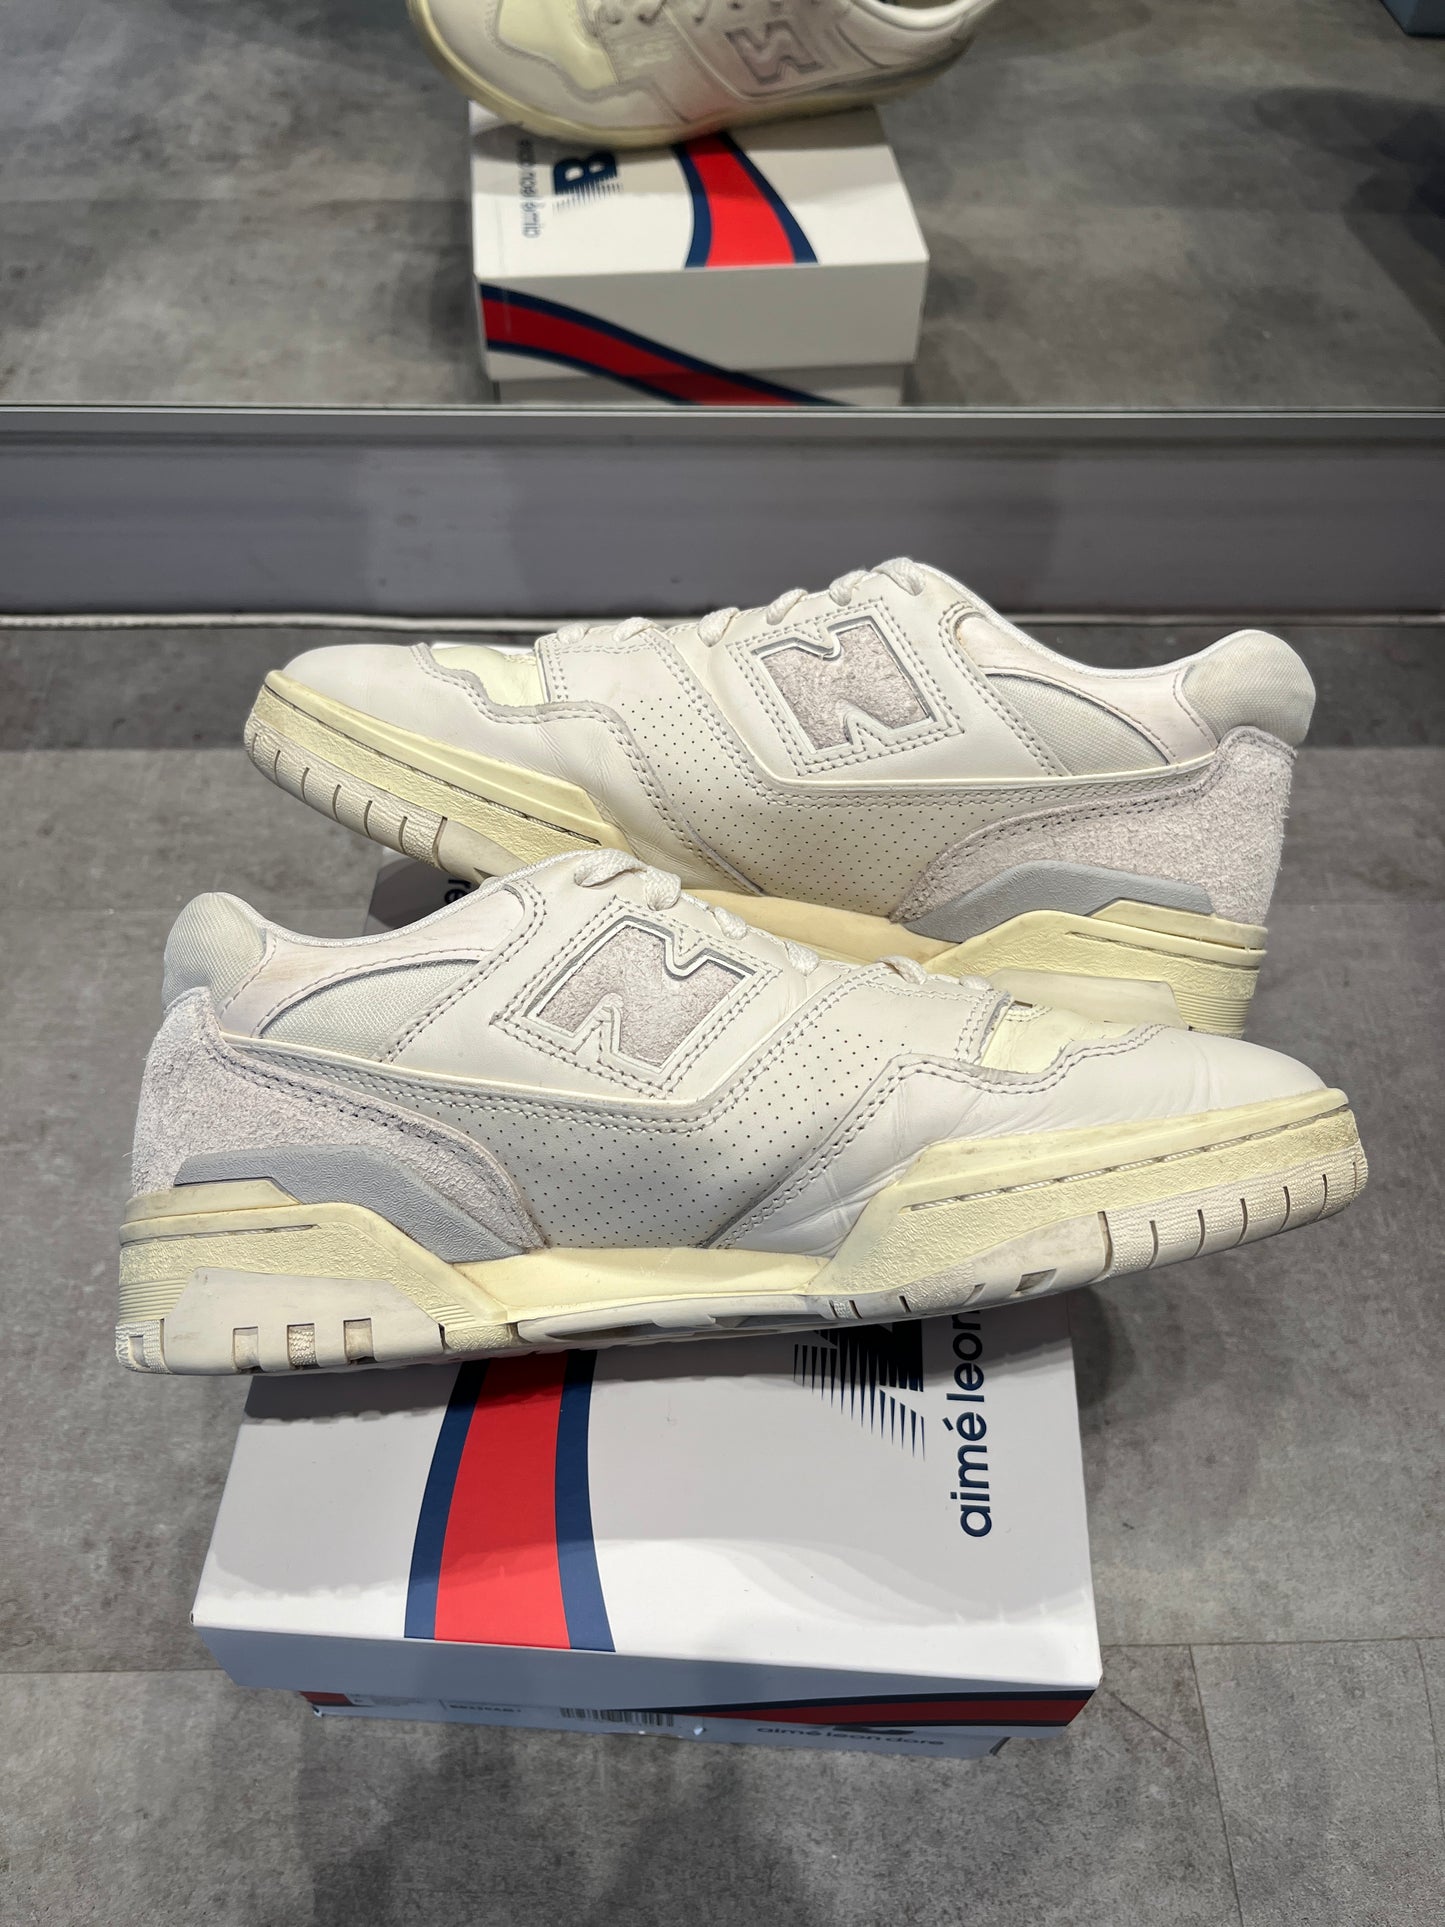 New Balance 550 Aime Leon Dore White Leather (Preowned)